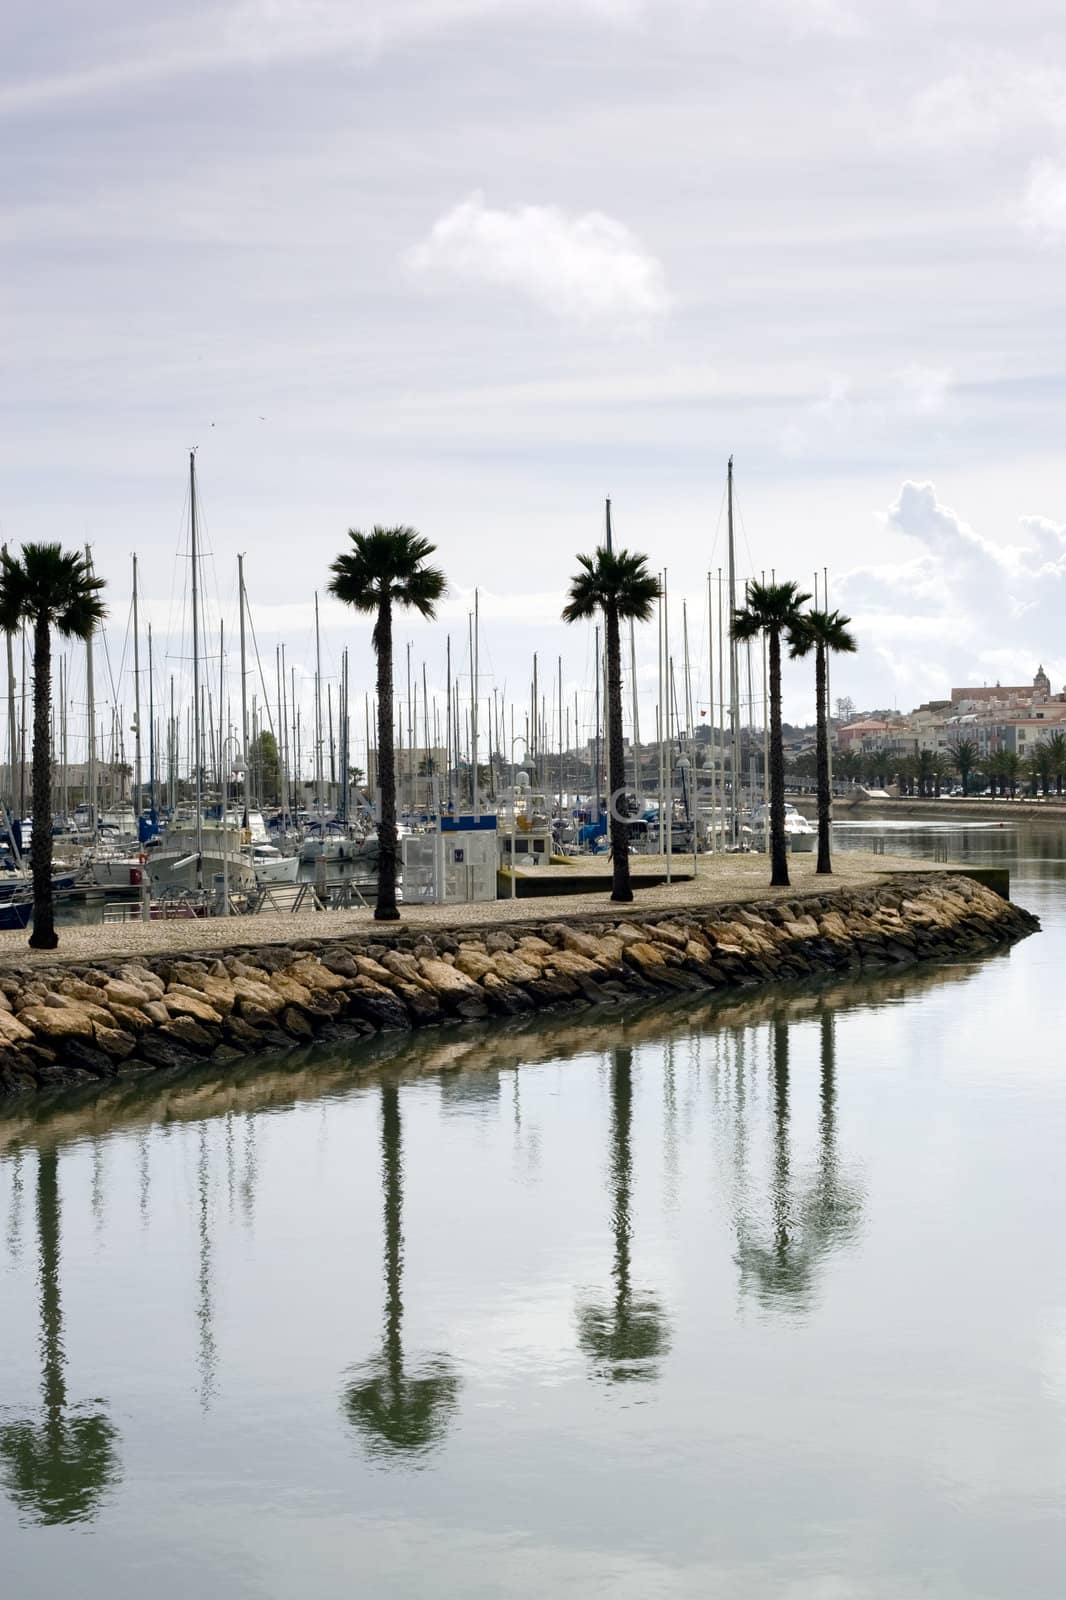 Along the canal waters, with palm trees and their reflection dotting the scene, and a marina in the background.  Vertical Composition. Taken in Lagos, Portugal